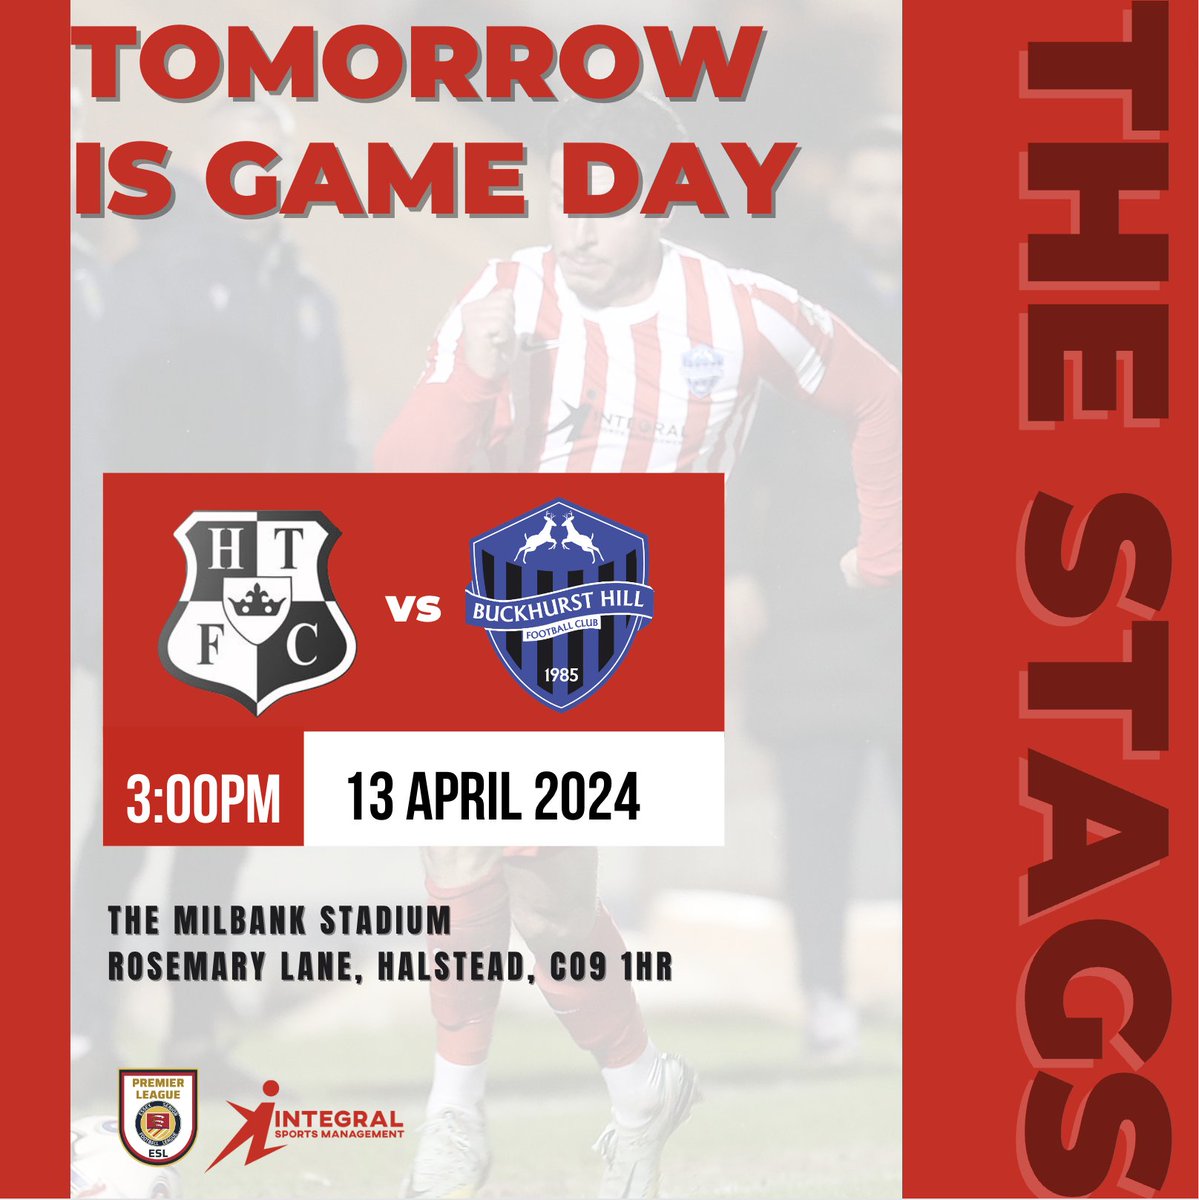 📢Tomorrow is an away day! 🔴 ⚪ ⚽ Let's get on the road with Mark's lads as we look to finish the season strong!💪 #COYStags 🦌